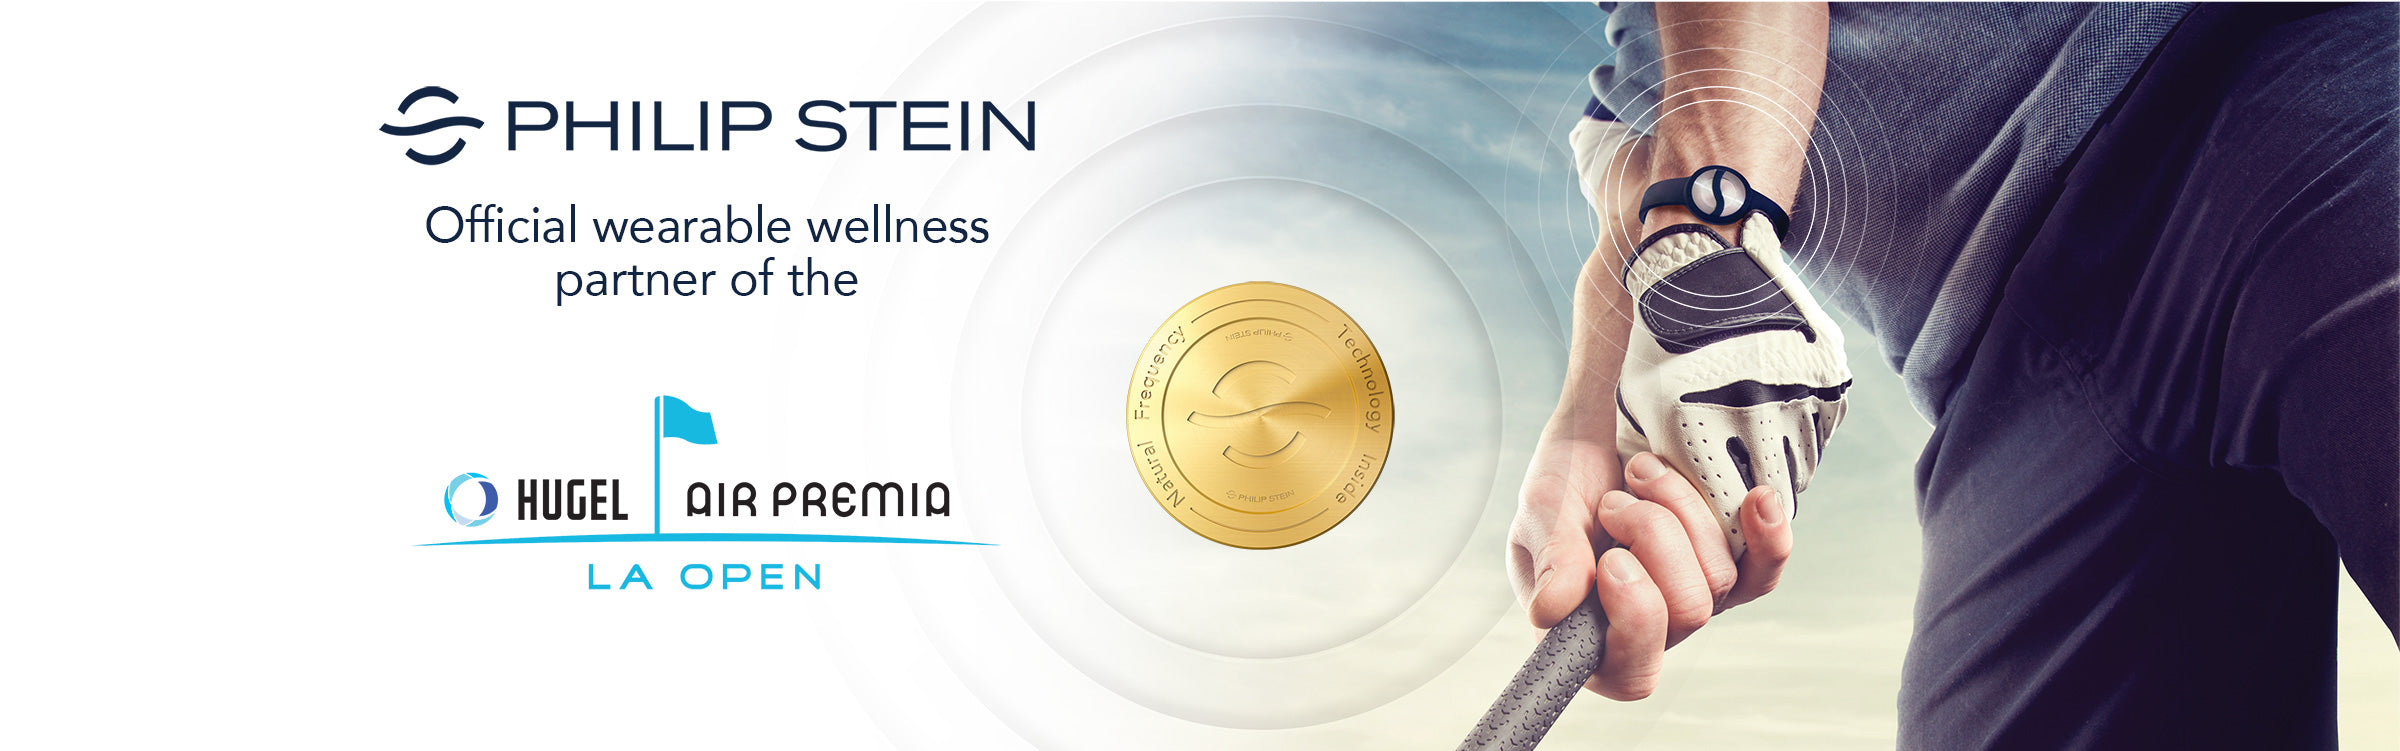 Philip Stein Official wearable wellness partner of the Hugel Air Premia LA Open